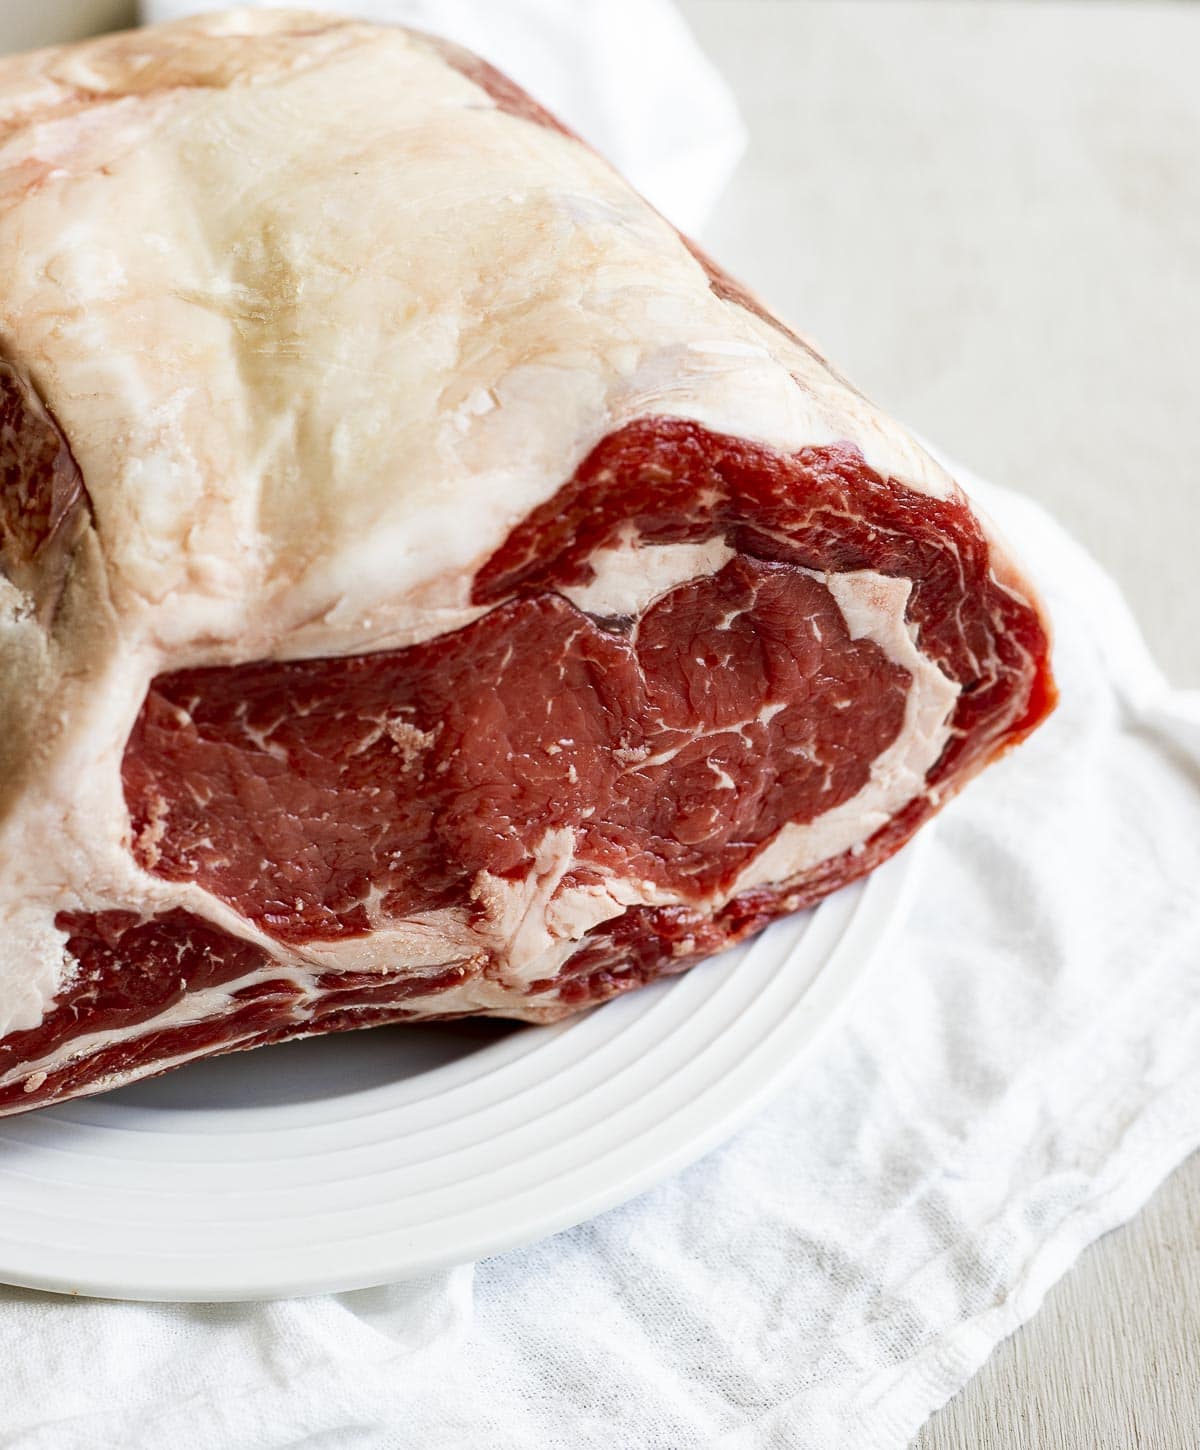 Side view of a raw prime rib roast on a white plate.